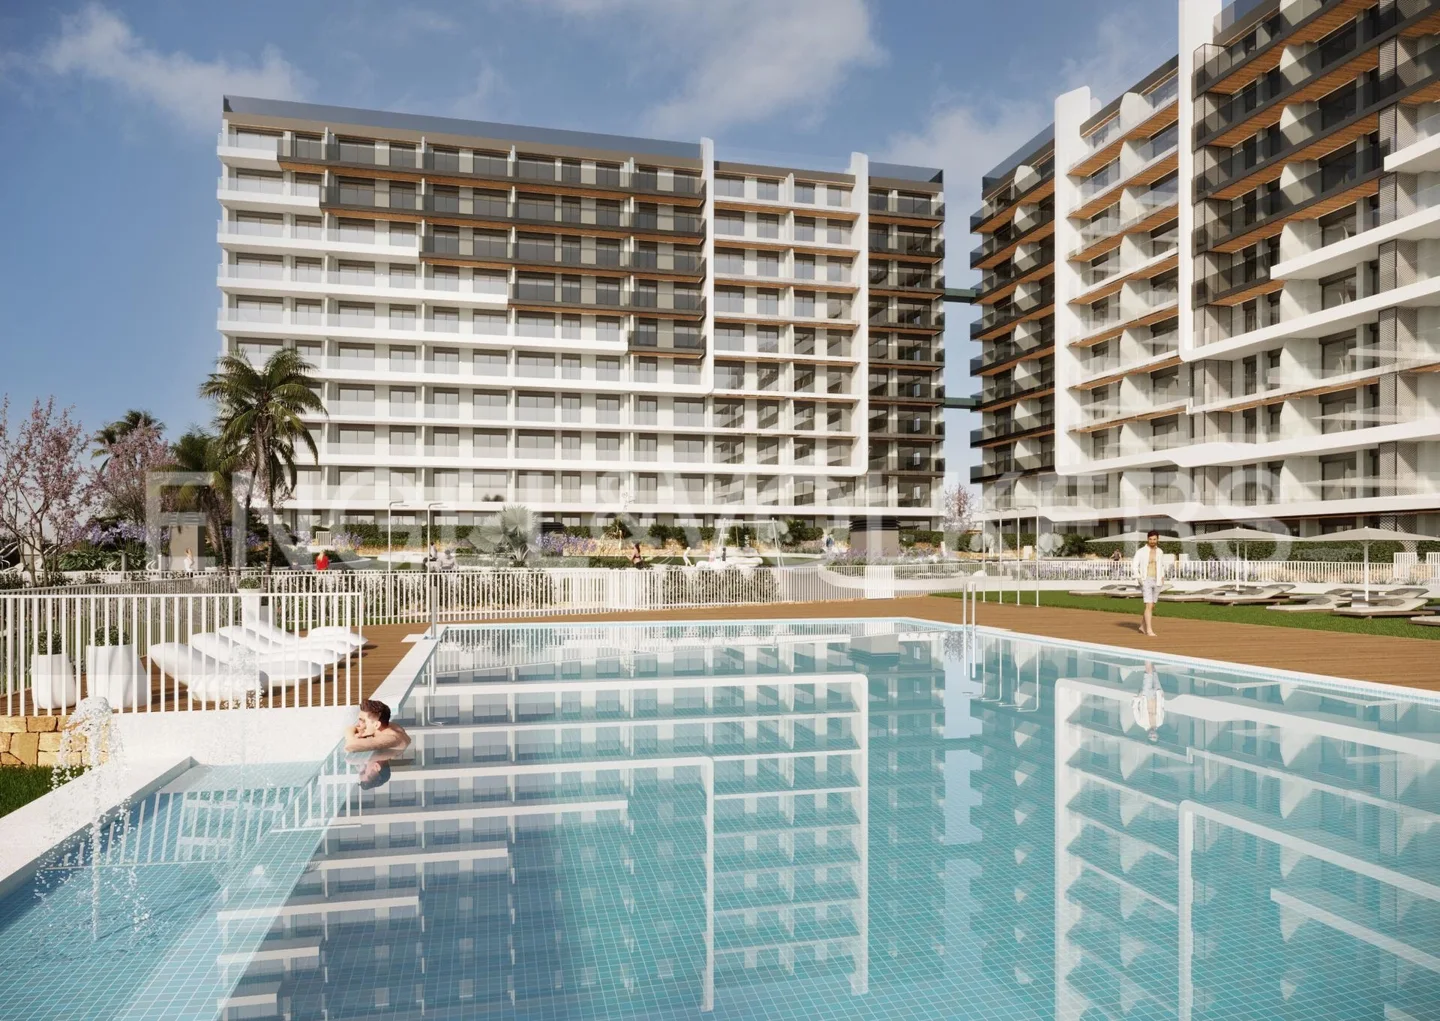 Newly built luxury apartments in Punta Prima